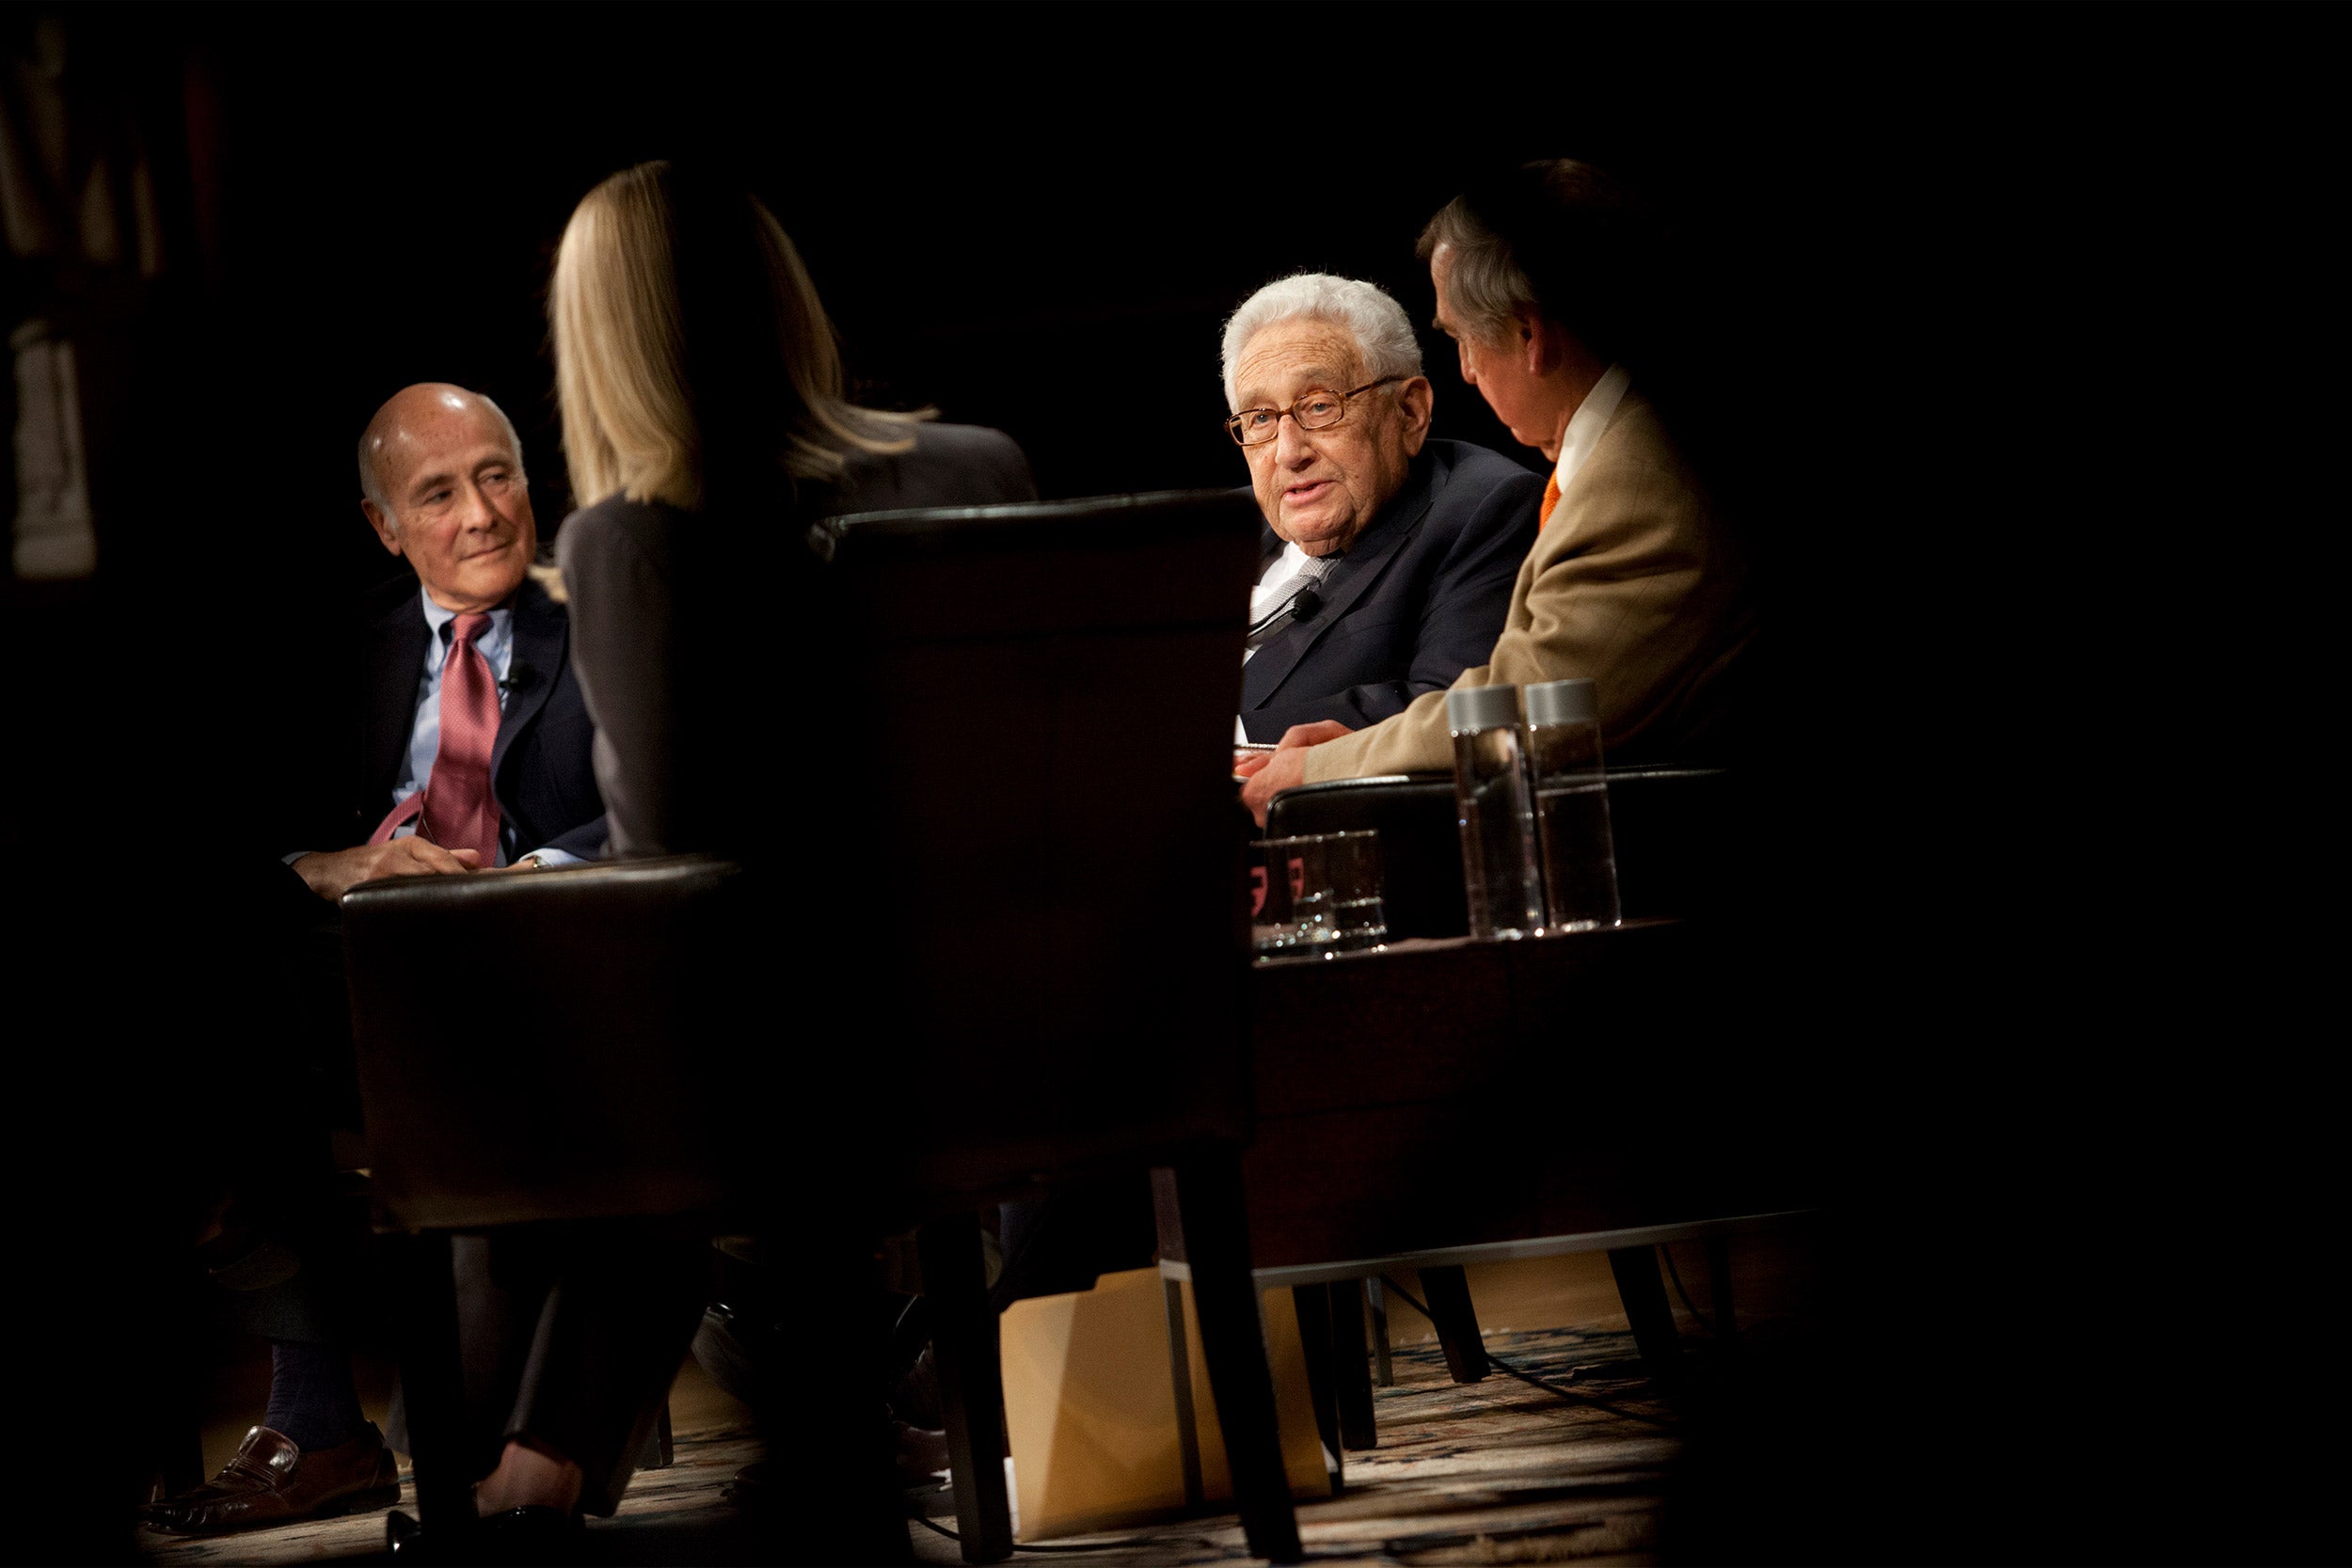 Henry Kissinger with Joseph Nye (left) and Graham Allison during a 2012 discussion.